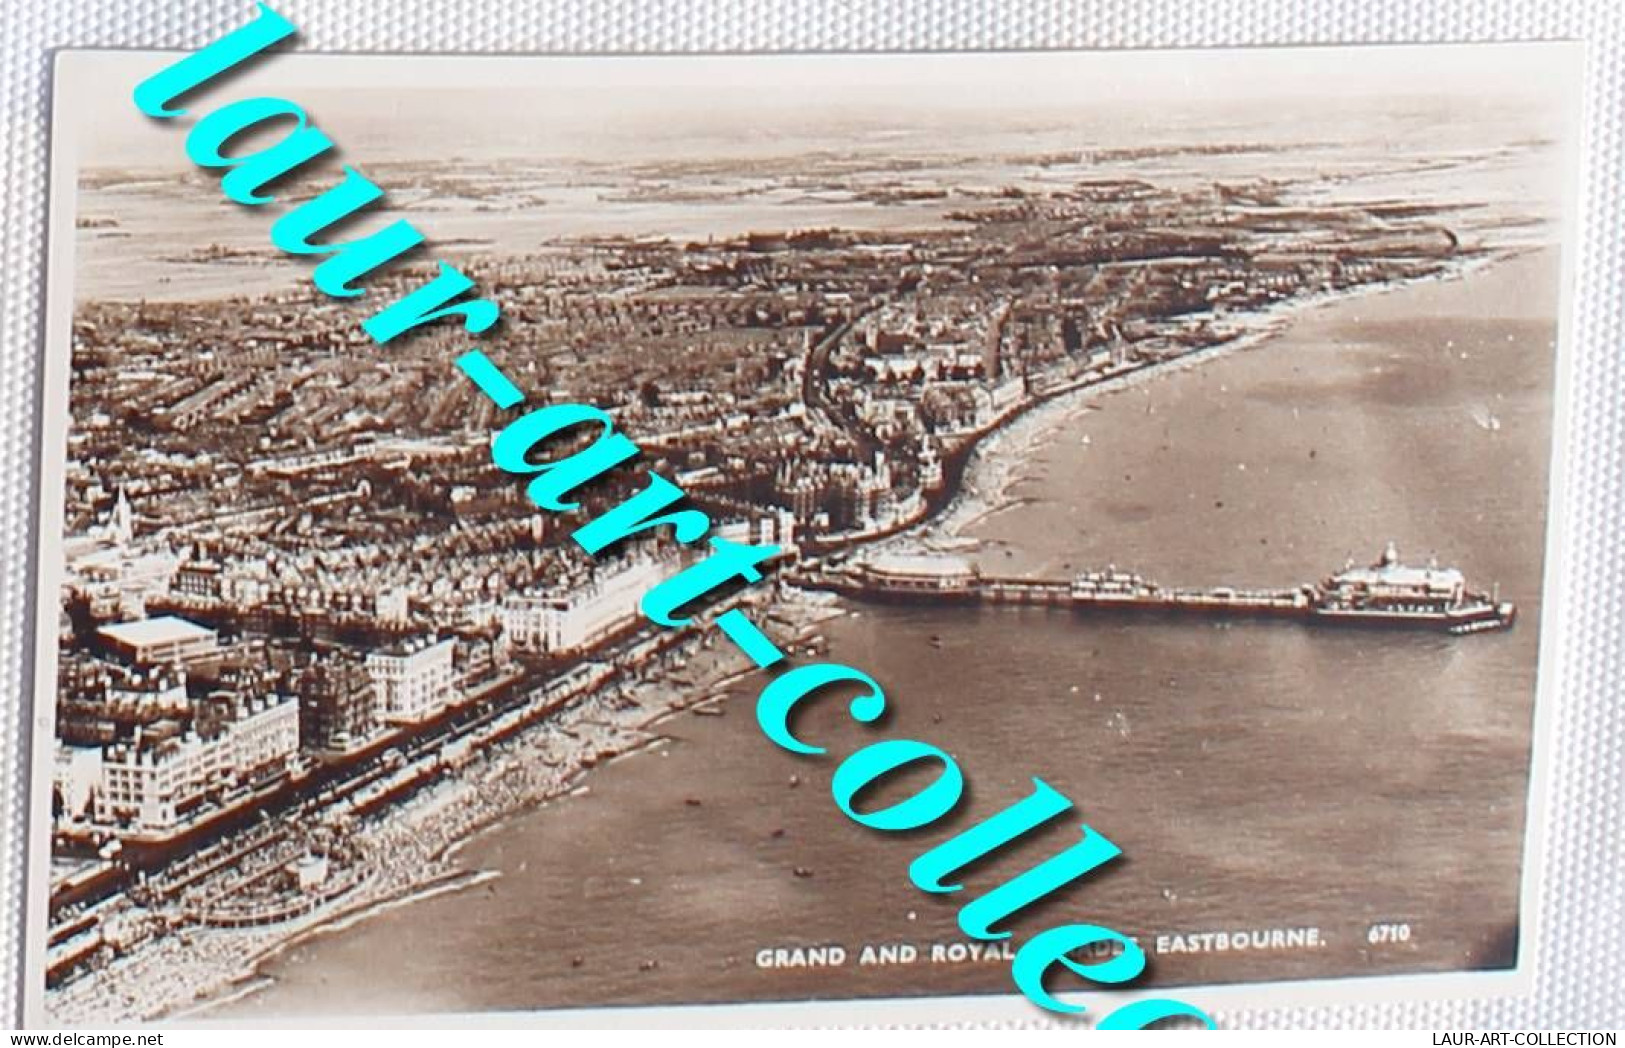 CPA ANGLETERRE EASTBOURNE MARINE & PARADE ROYAUME UNI PLAGE MER, VRAIE PHOTO / CARTE POSTALE ANCIENNE / POST CARD (1996) - Eastbourne